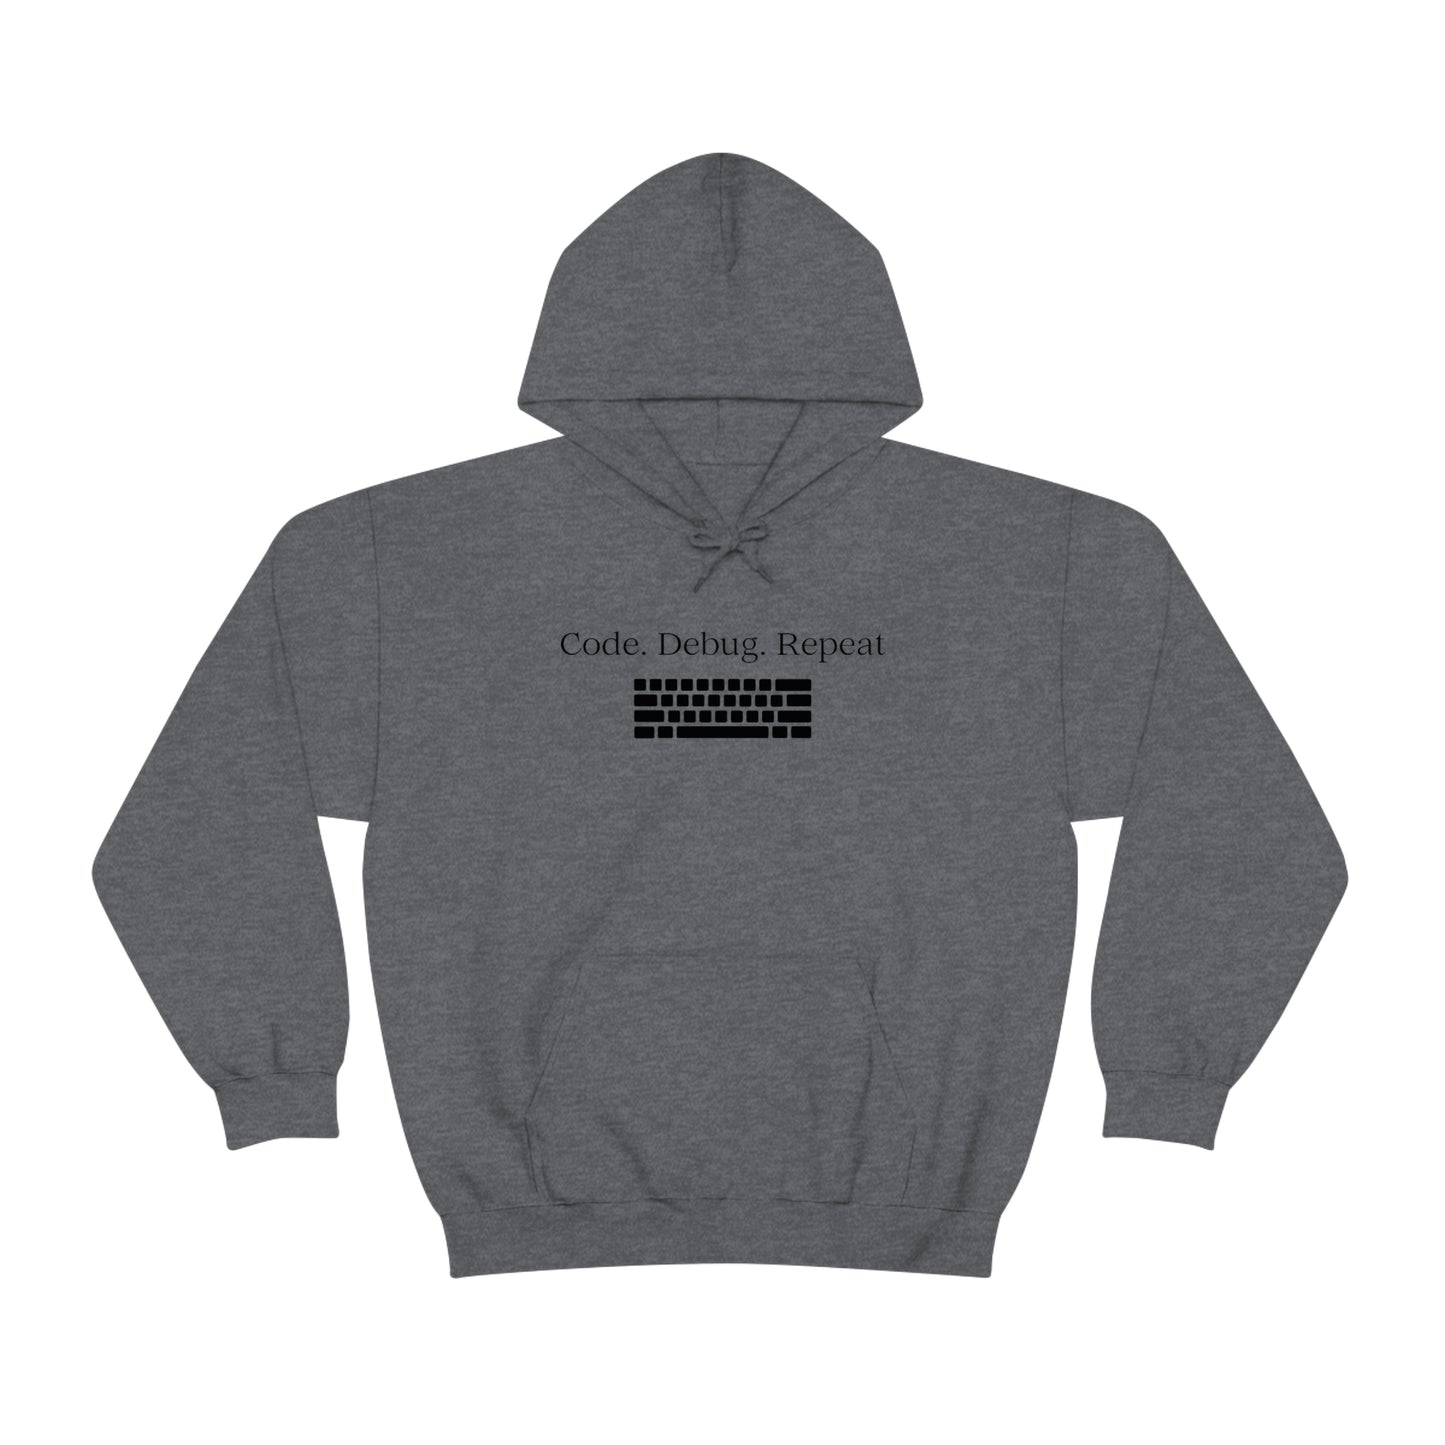 Wrap Yourself in Style and Functionality with Our Code.Debug.Repeat Unisex Heavy Blend™ Hooded Sweatshirt